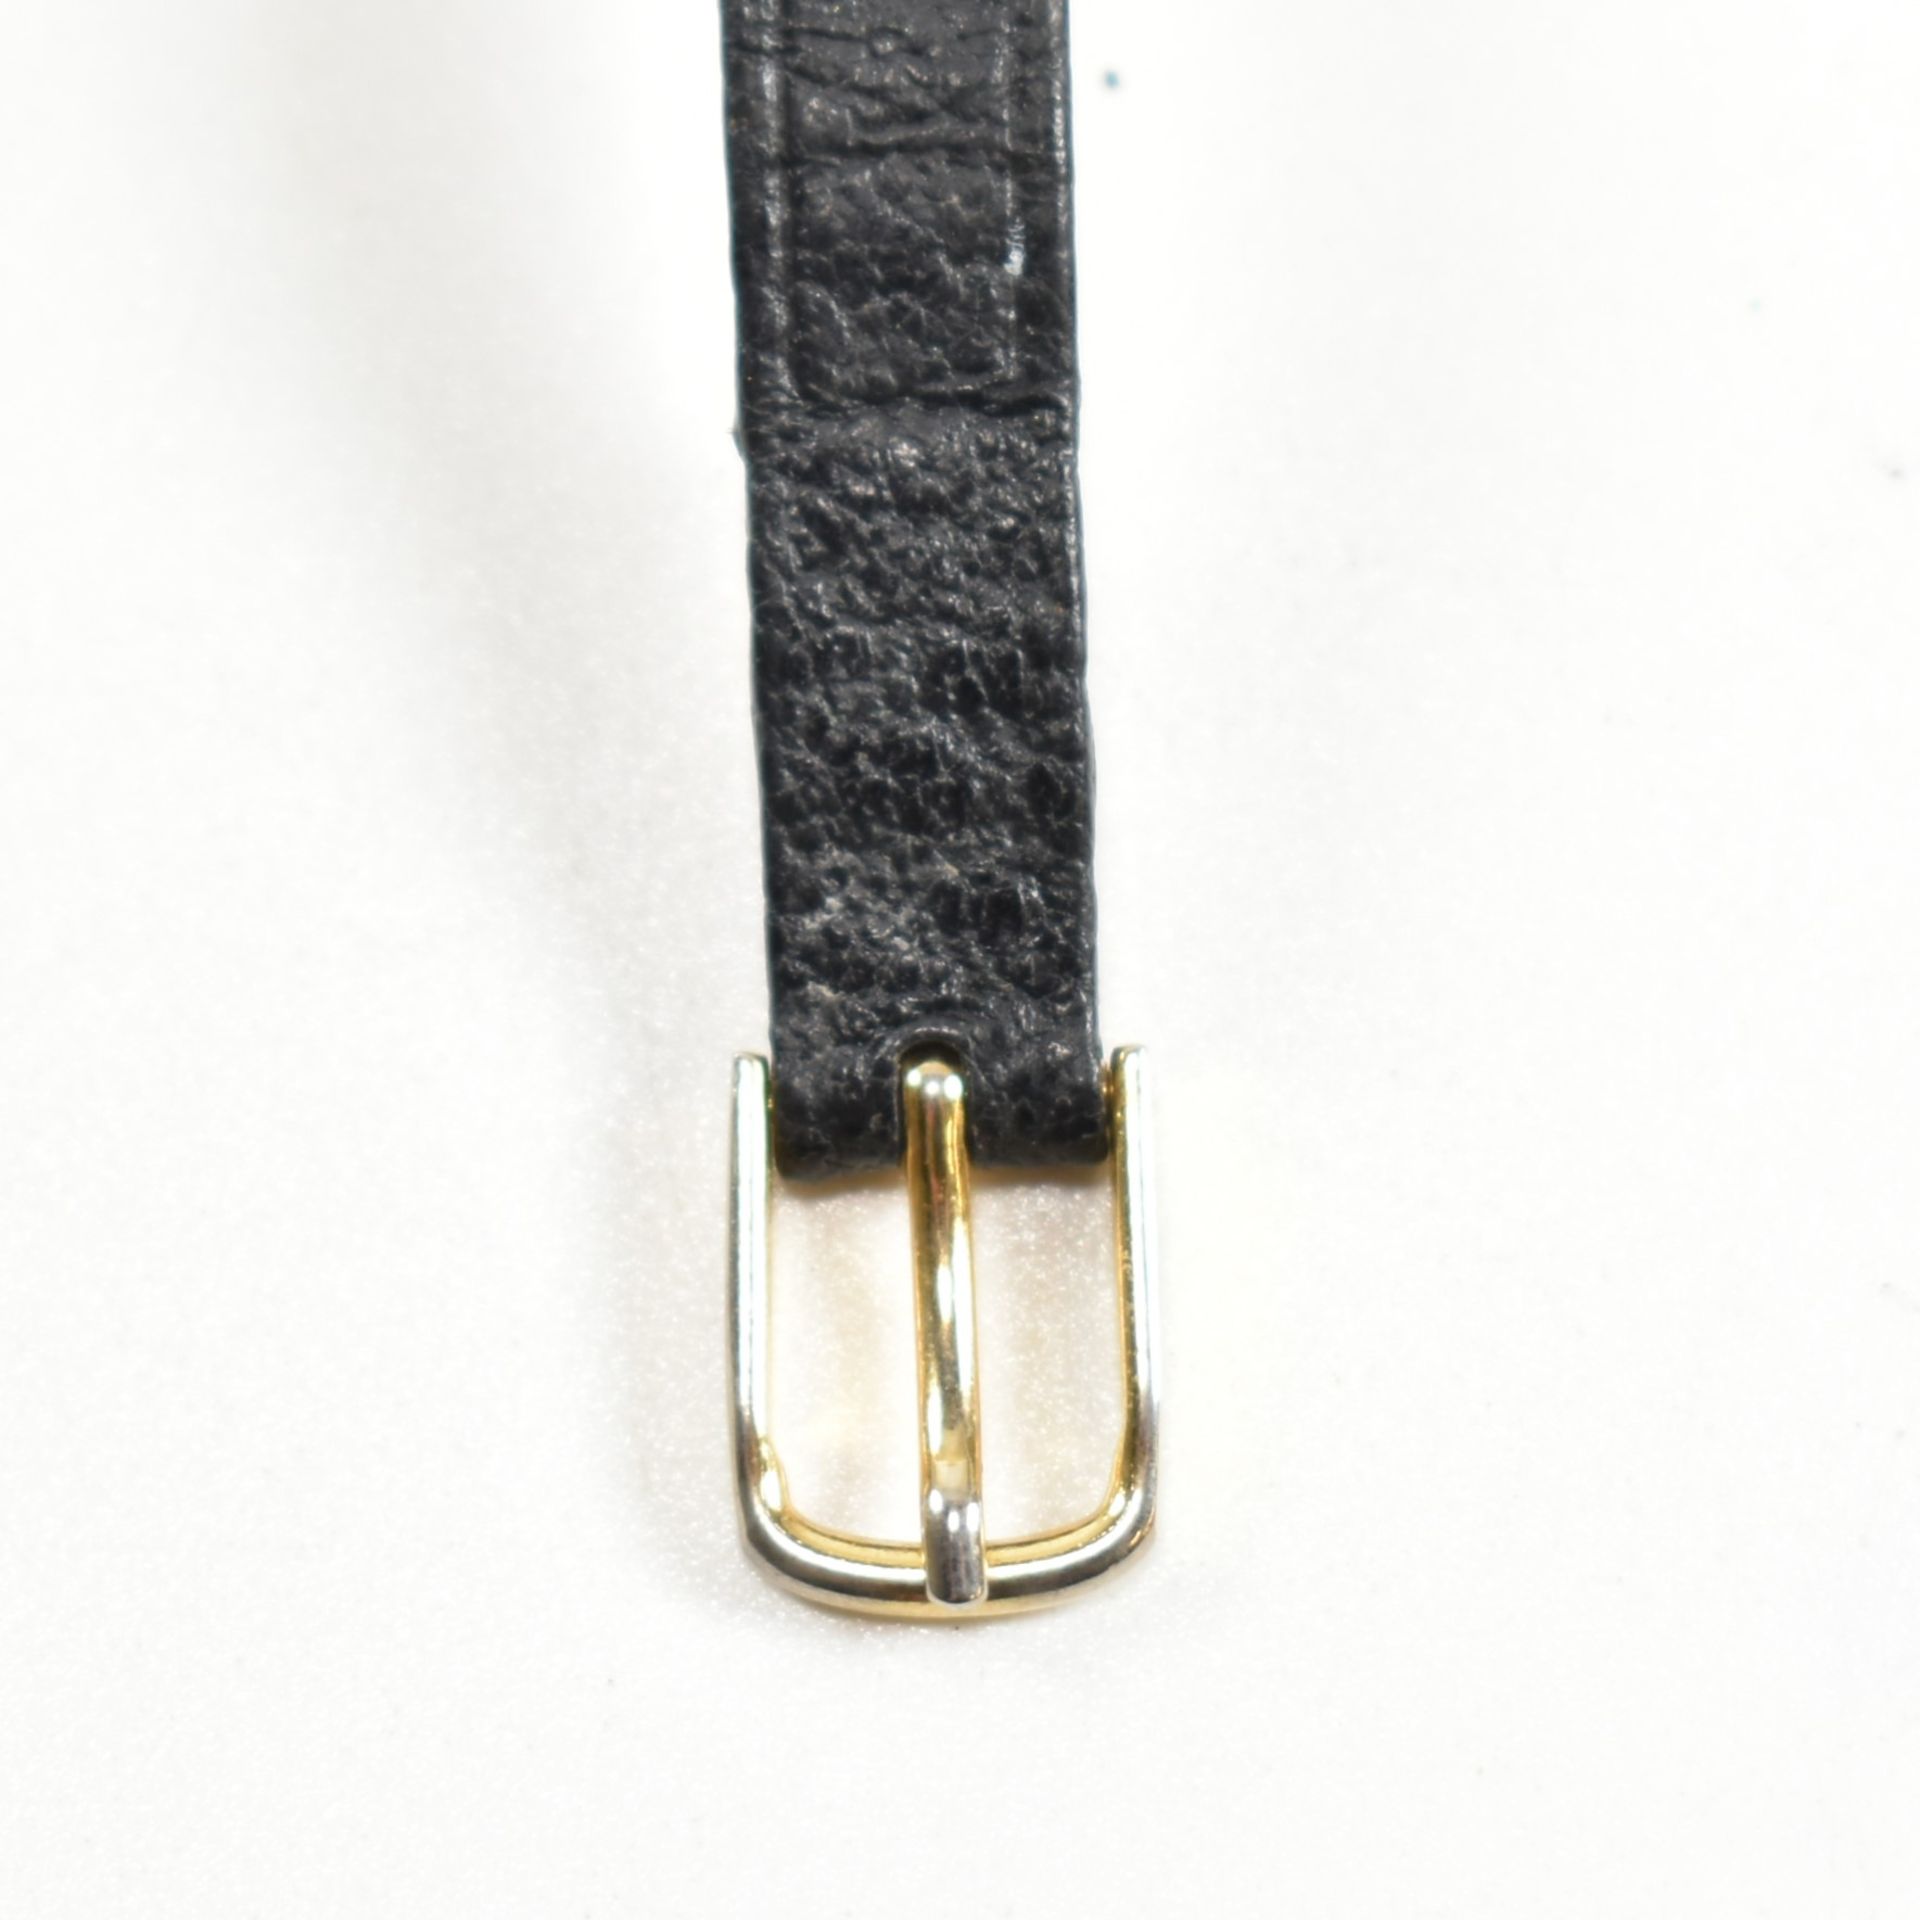 HALLMARKED 9CT GOLD WRISTWATCH WITH LEATHER STRAP - Image 4 of 6